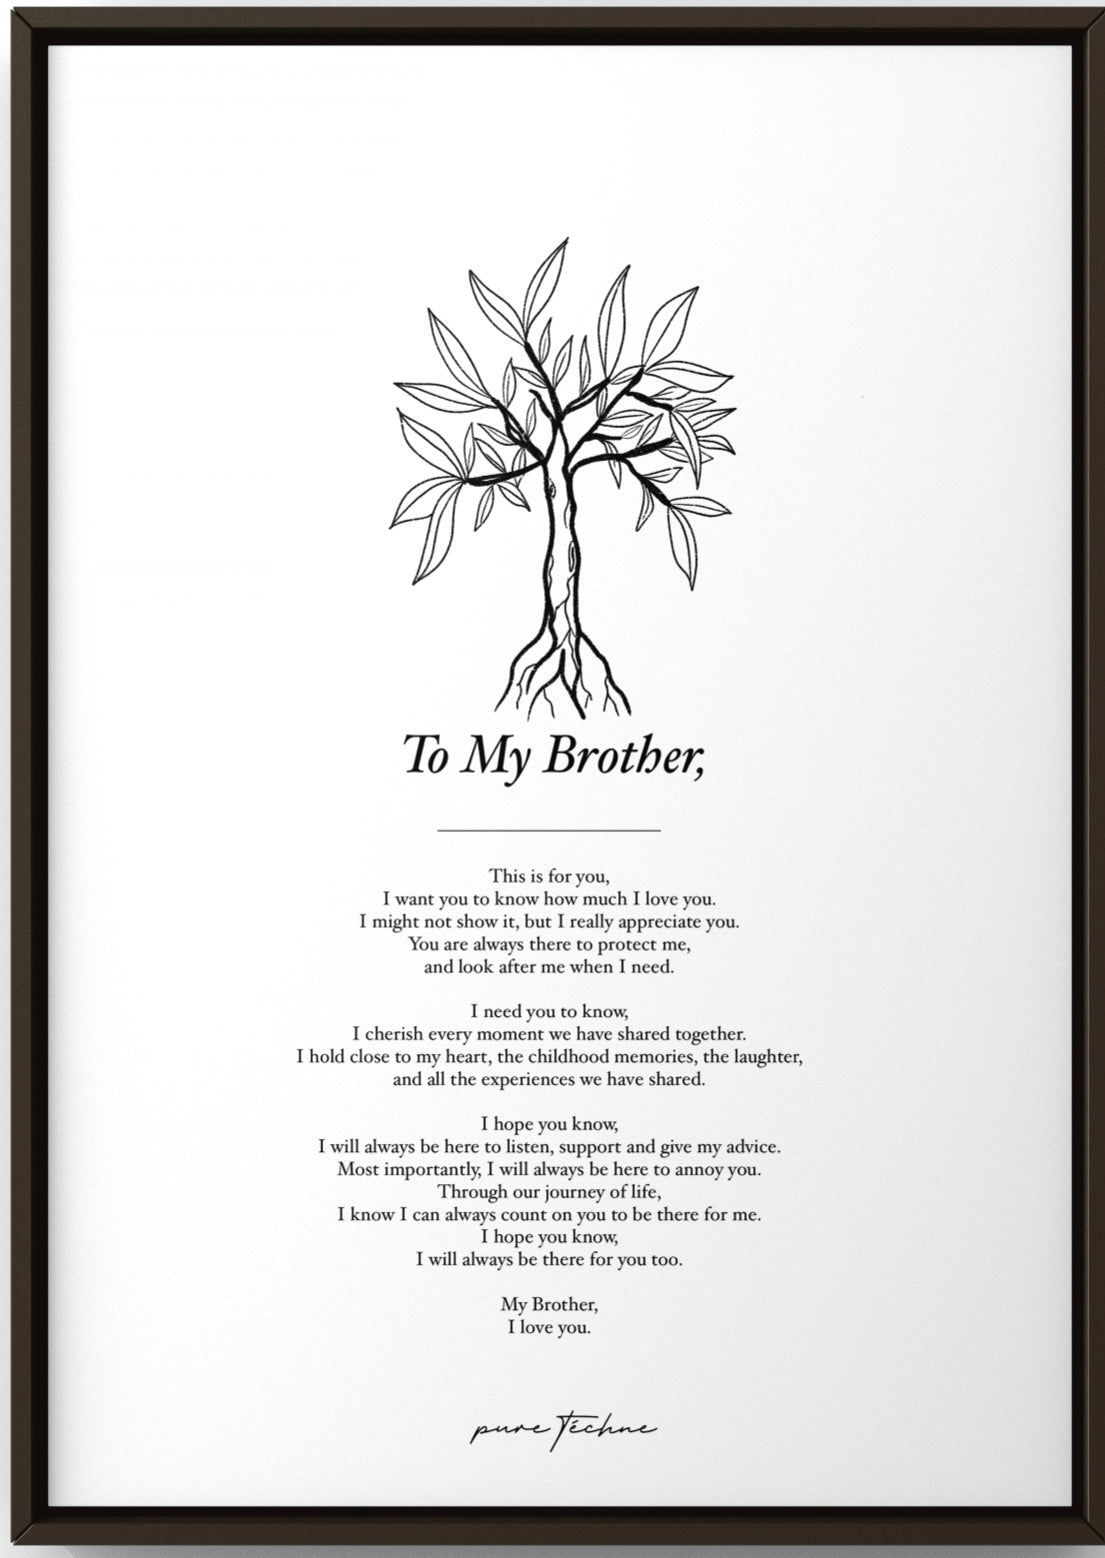 personalised artwork for brother, meaningful words